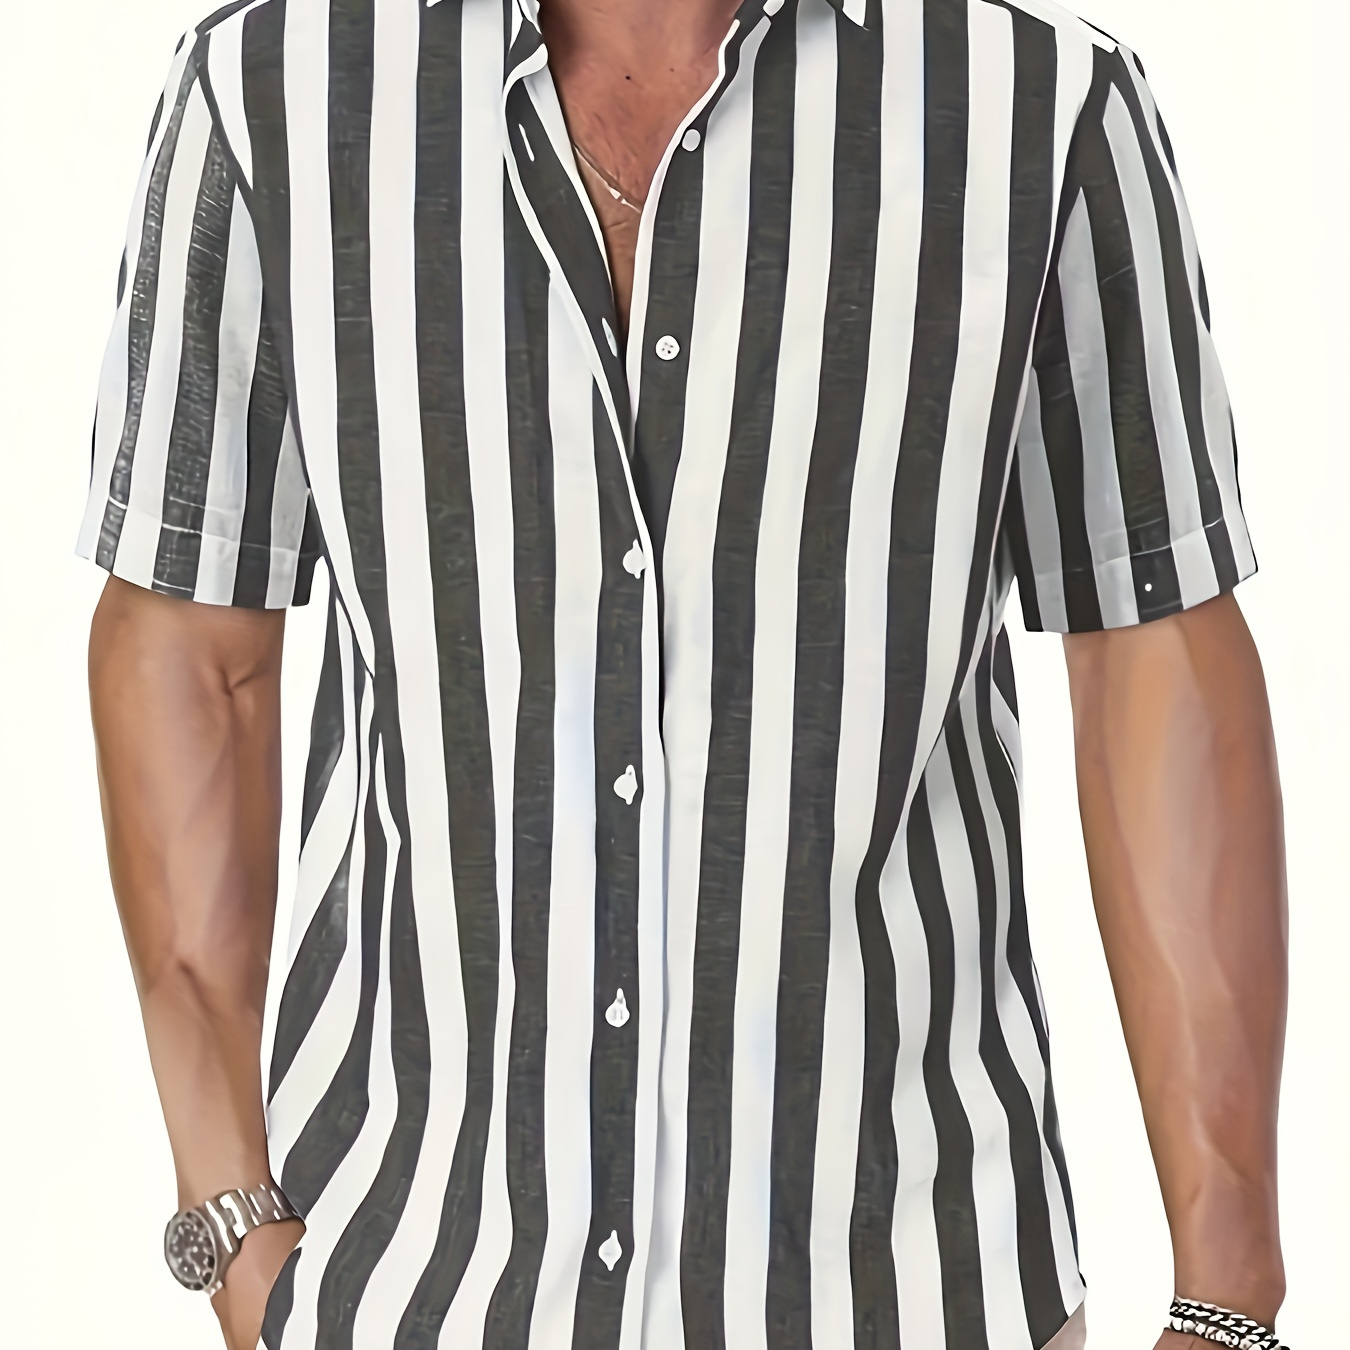 

Men's Casual Button Up Lapel Collar Shirt With Stylish Stripe, Men's Classic Striped Short Sleeve Shirt For Summer Vacation And Casual Wear